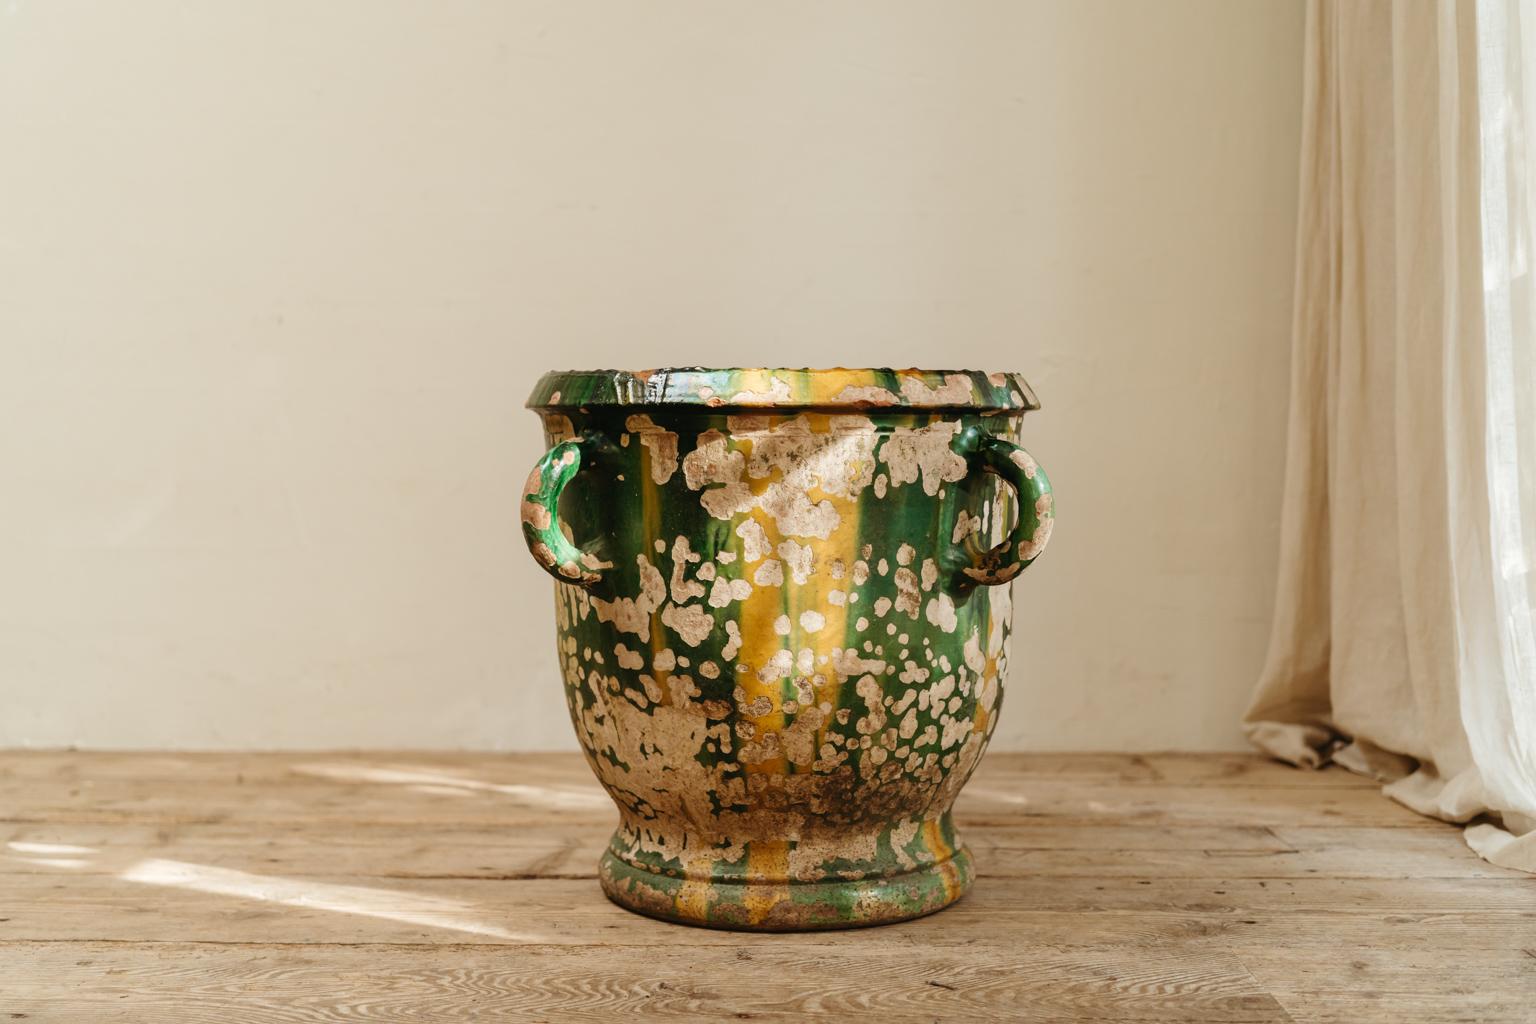 This xl green and yellow glazed terra cotta planter/jardinière from Castelnaudary in the South of France has a wonderful patina, can be used indoors or outdoors, was originally made for a castle garden in the South of France.